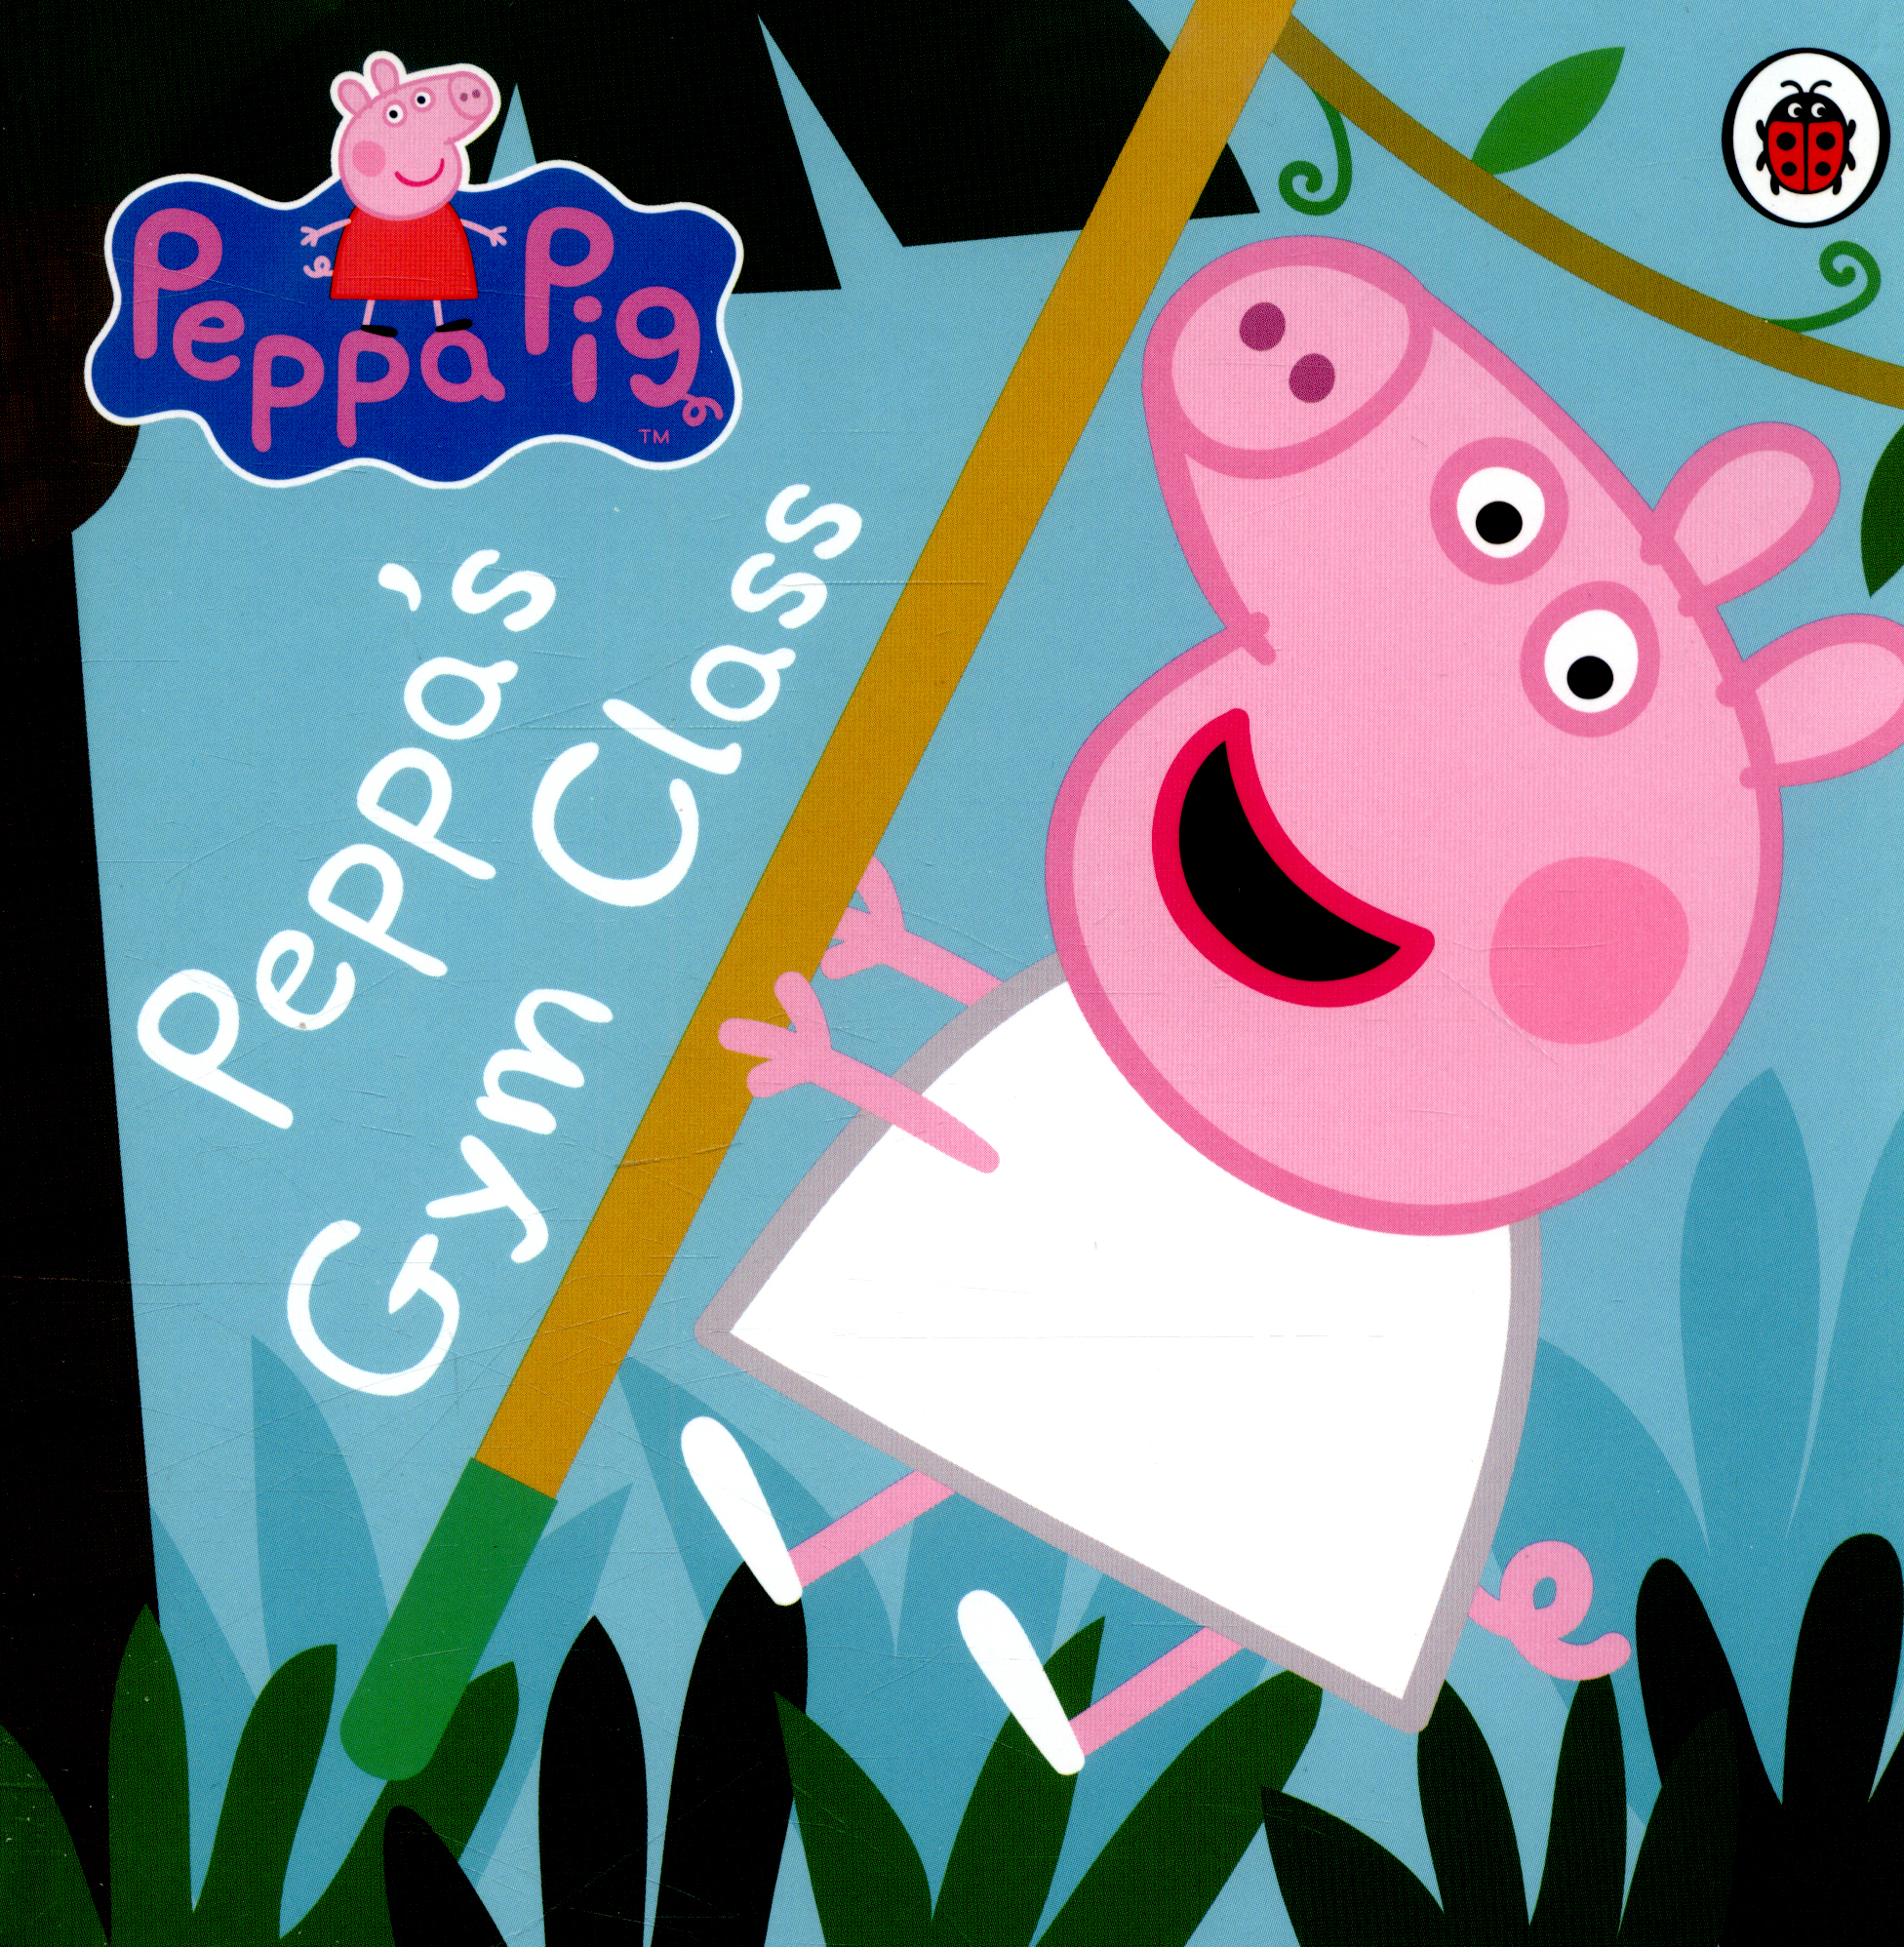 44  Peppa pig workout for ABS